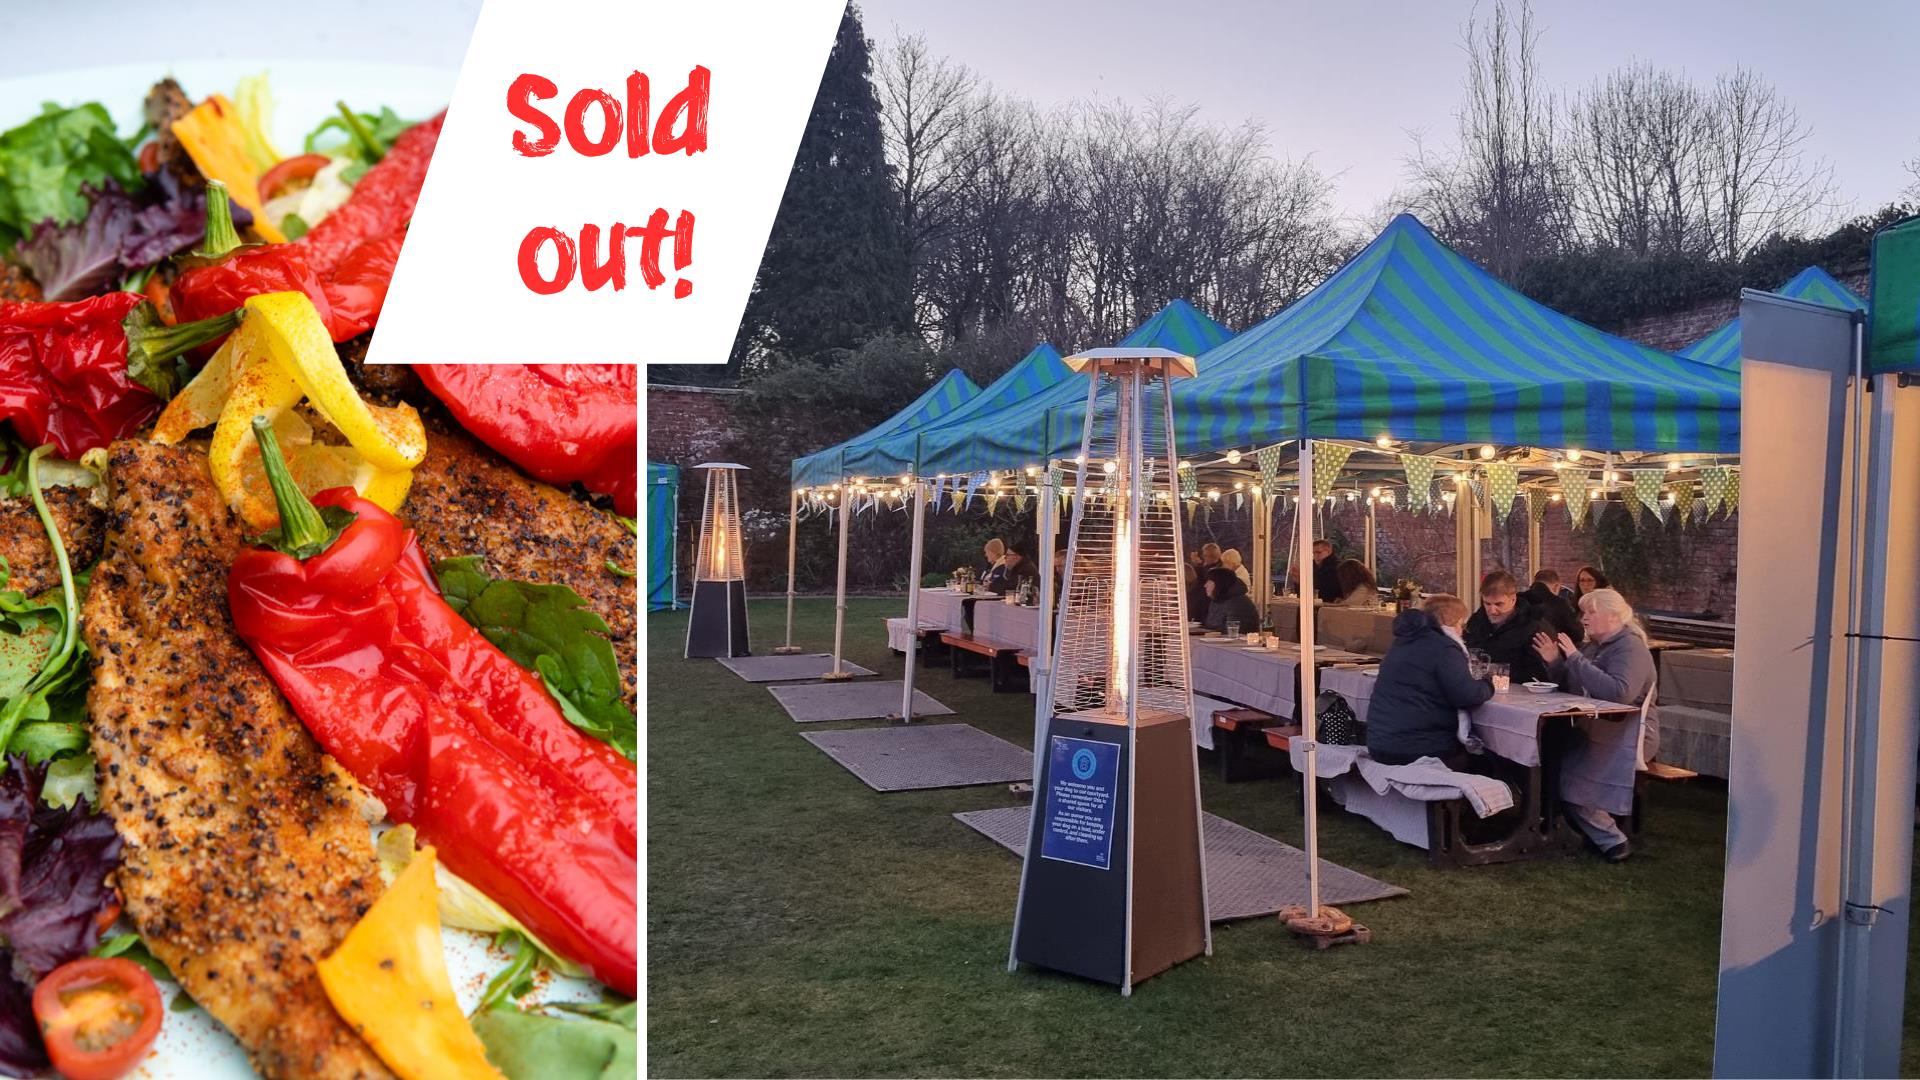 Two images - one of a Chilli dish and the other of people sitting enjoying a BBQ meal in the Walled Garden, with text saying Sold out.